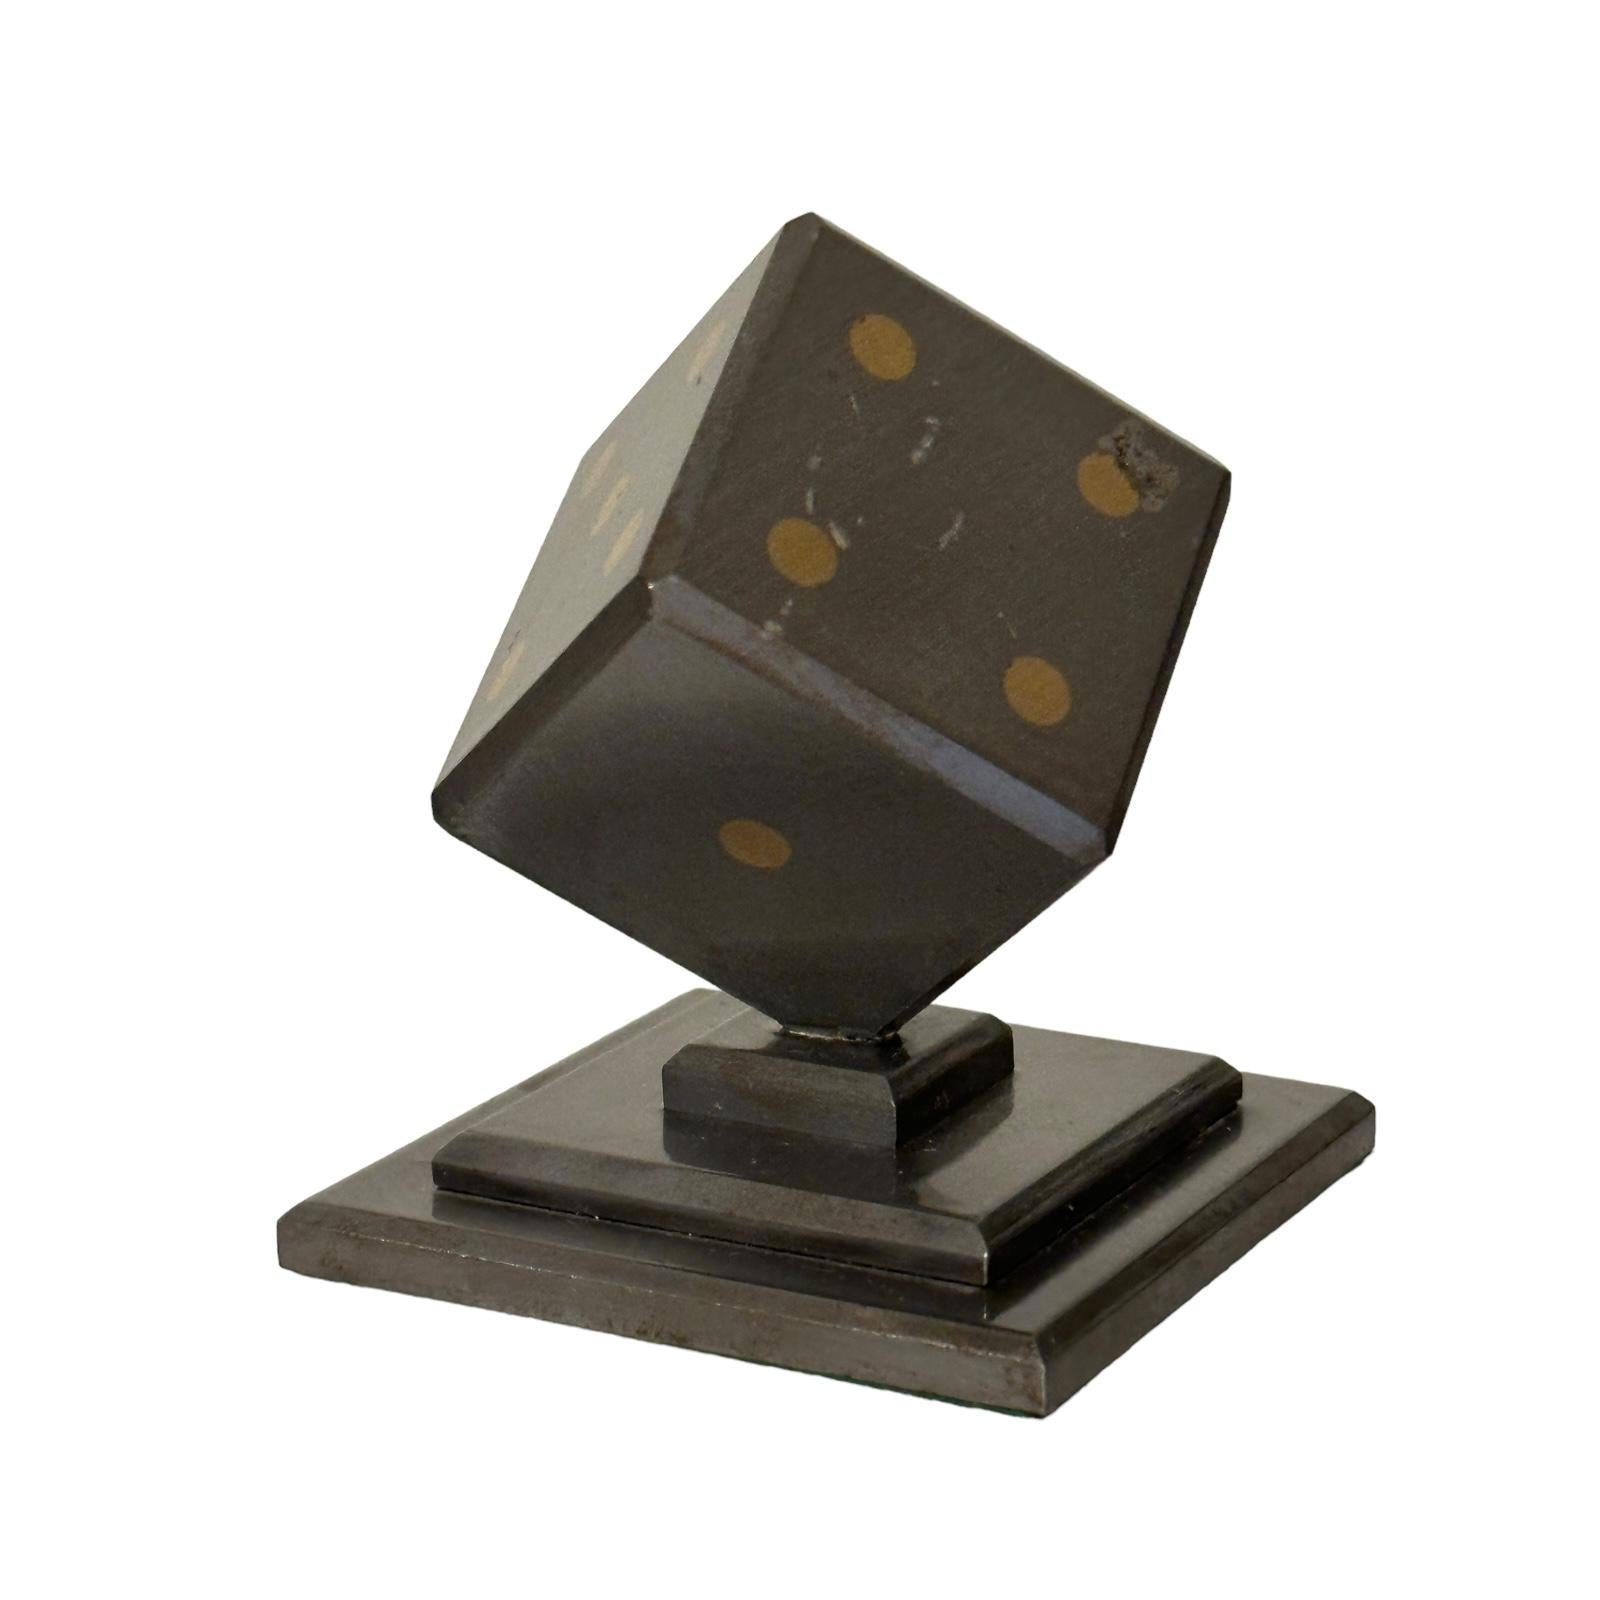 Late 20th Century Dice Metal Statue Paper Weight Mid-Century Modern, German, 1970s For Sale